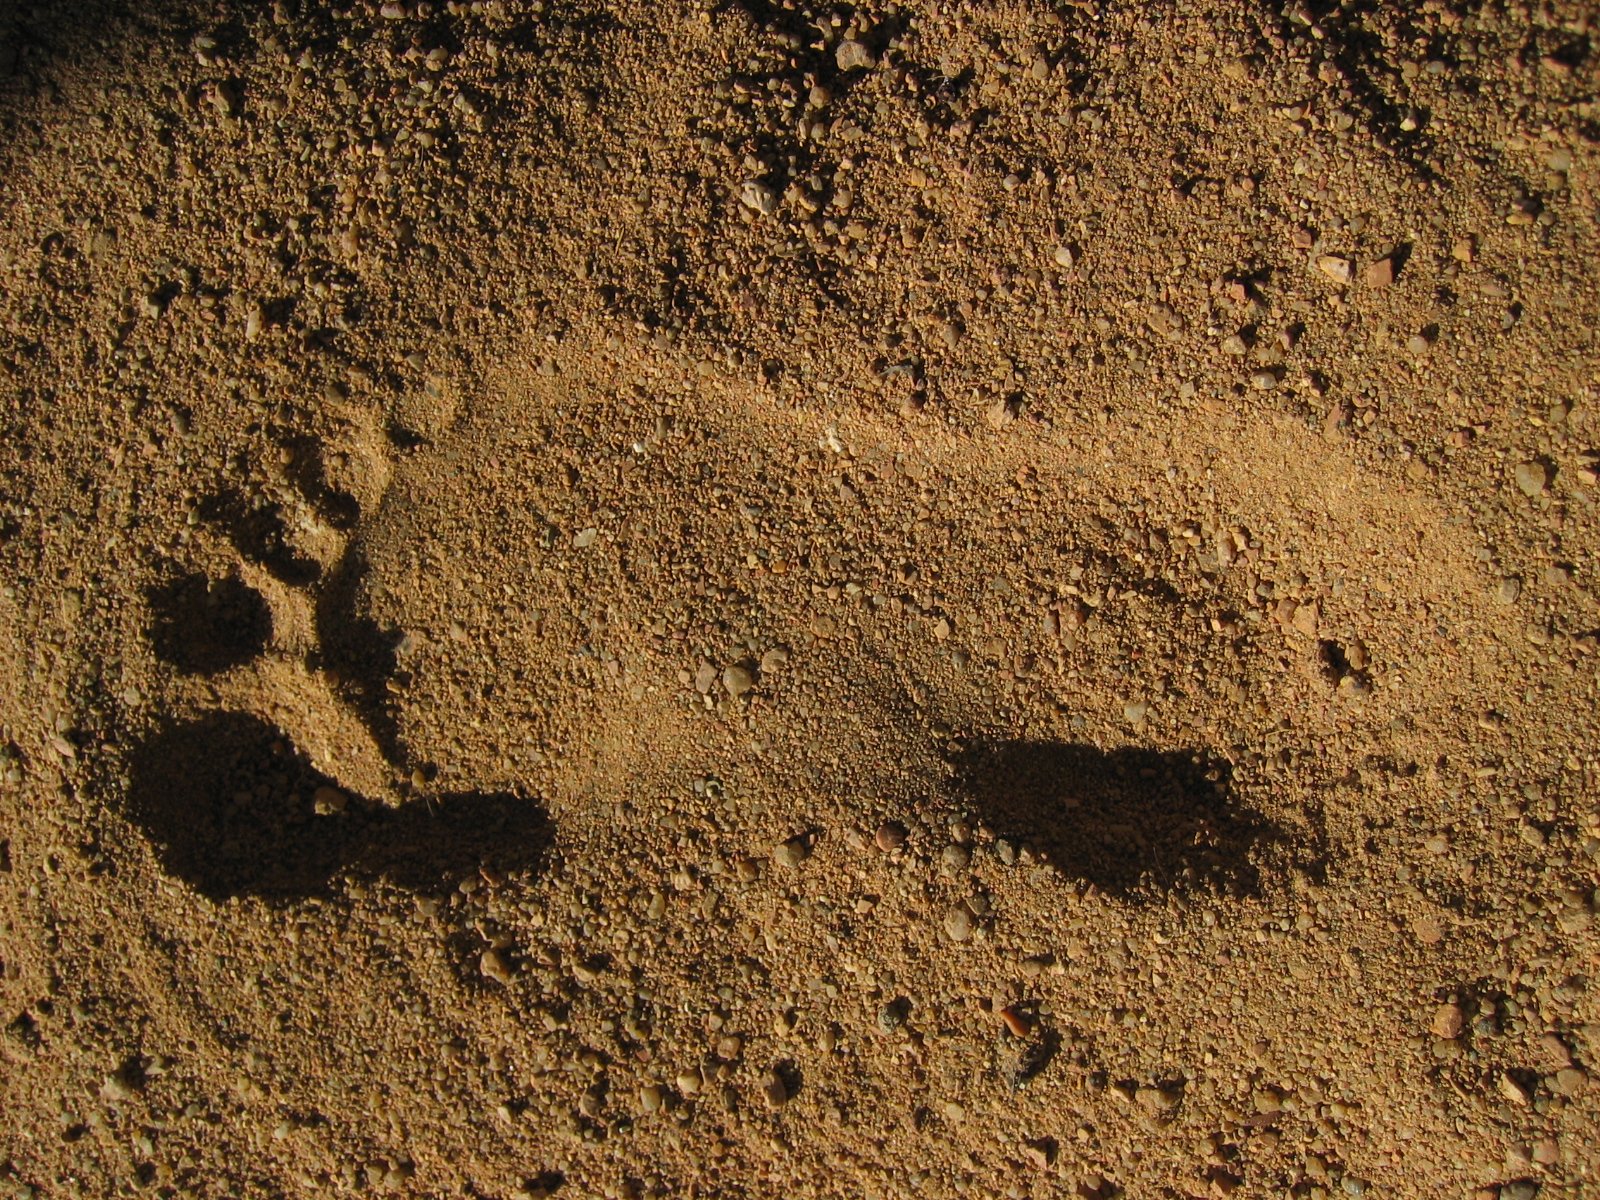 dog footprints on sand near ground with no one